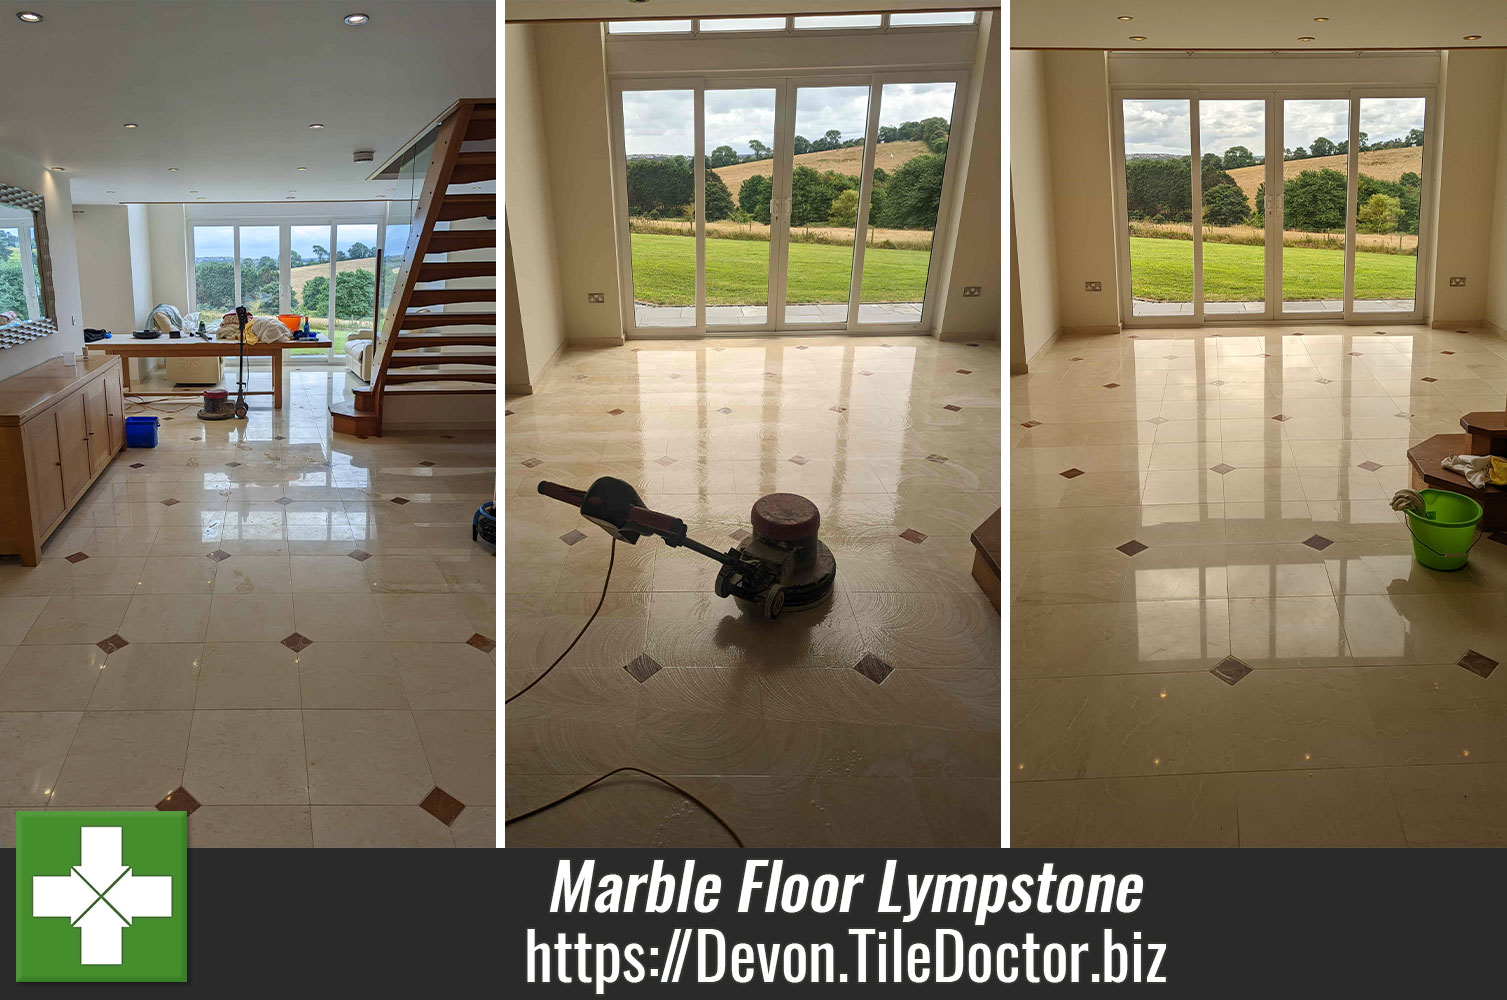 Wax Sealed 130m2 Cream Marble Tiled Floor Polished in Lympstone